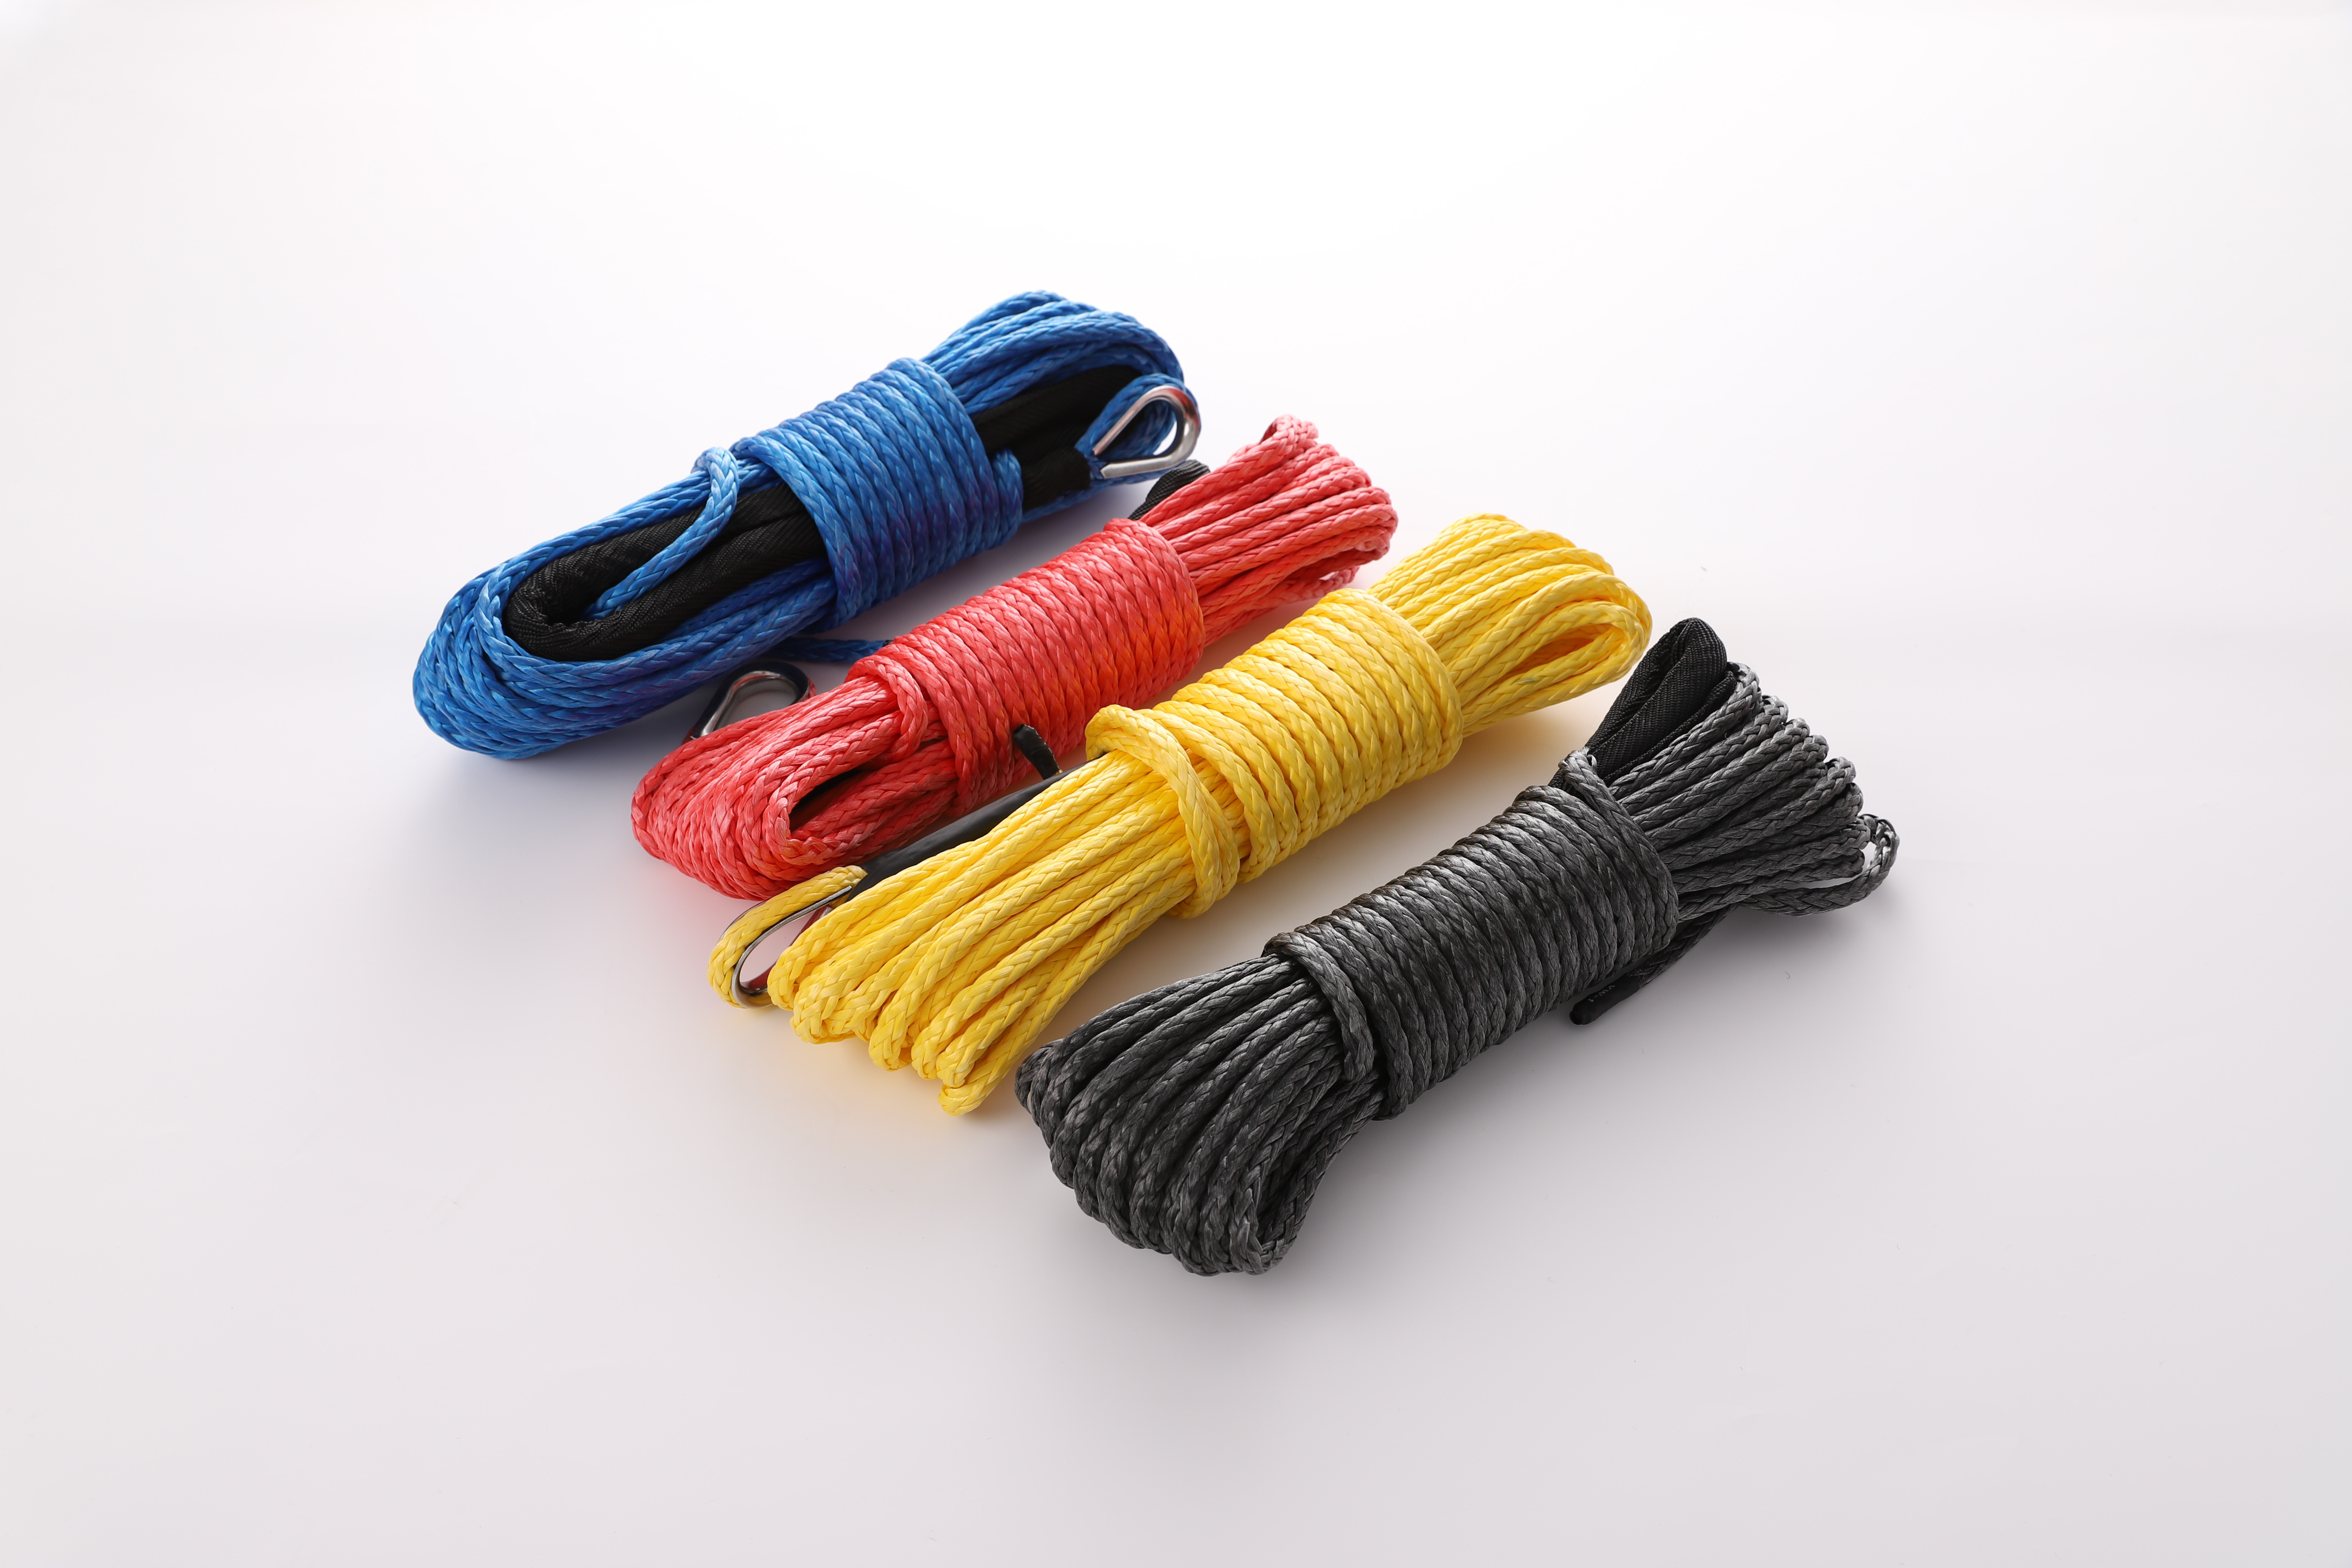 Synthetic Winch Rope 1/4" x 50' 7700LBs Towing Winch Cables